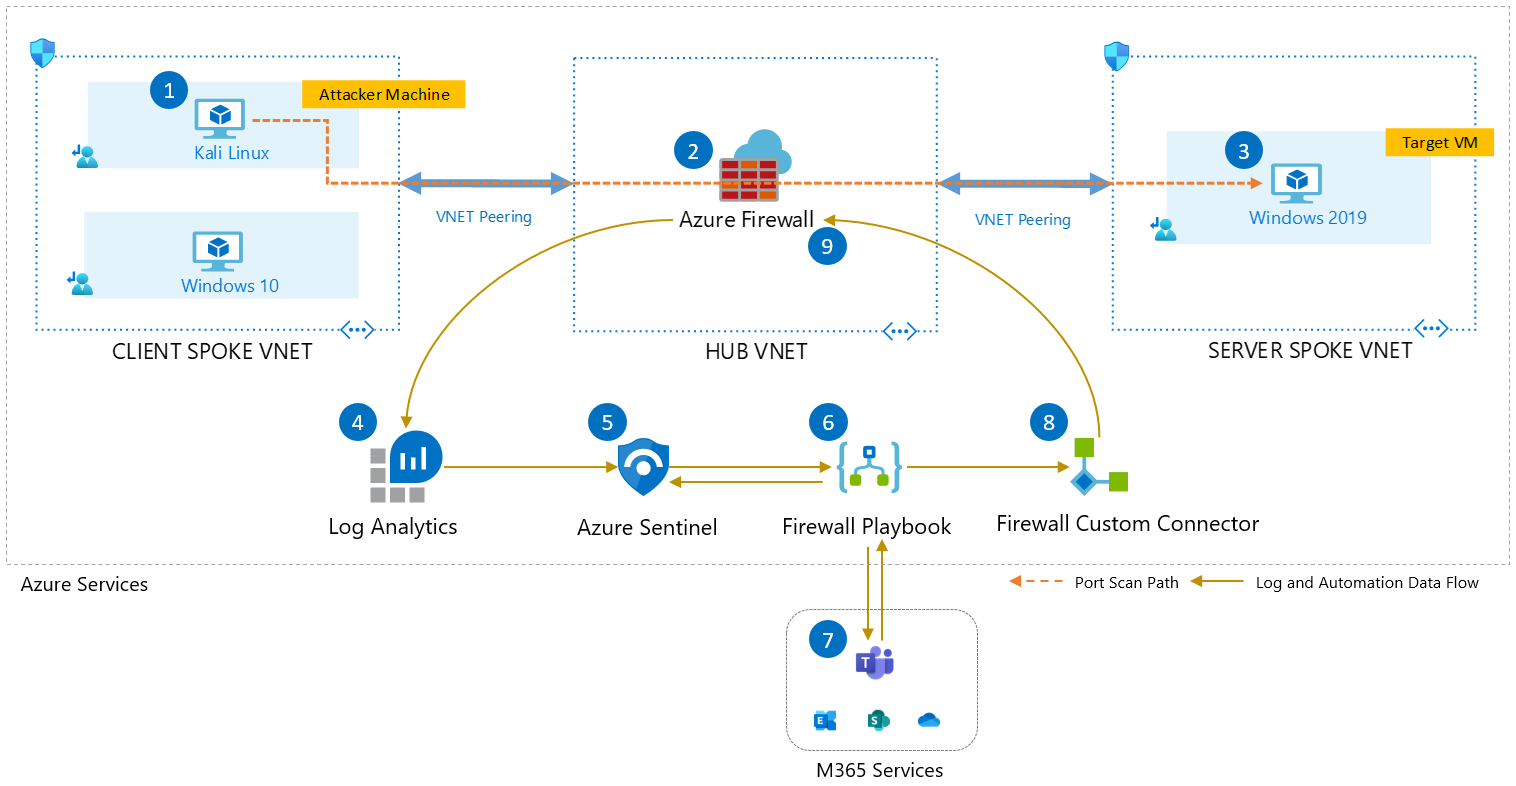 New Hunting Queries and Response Automation in Azure Firewall Solution for Azure Sentinel